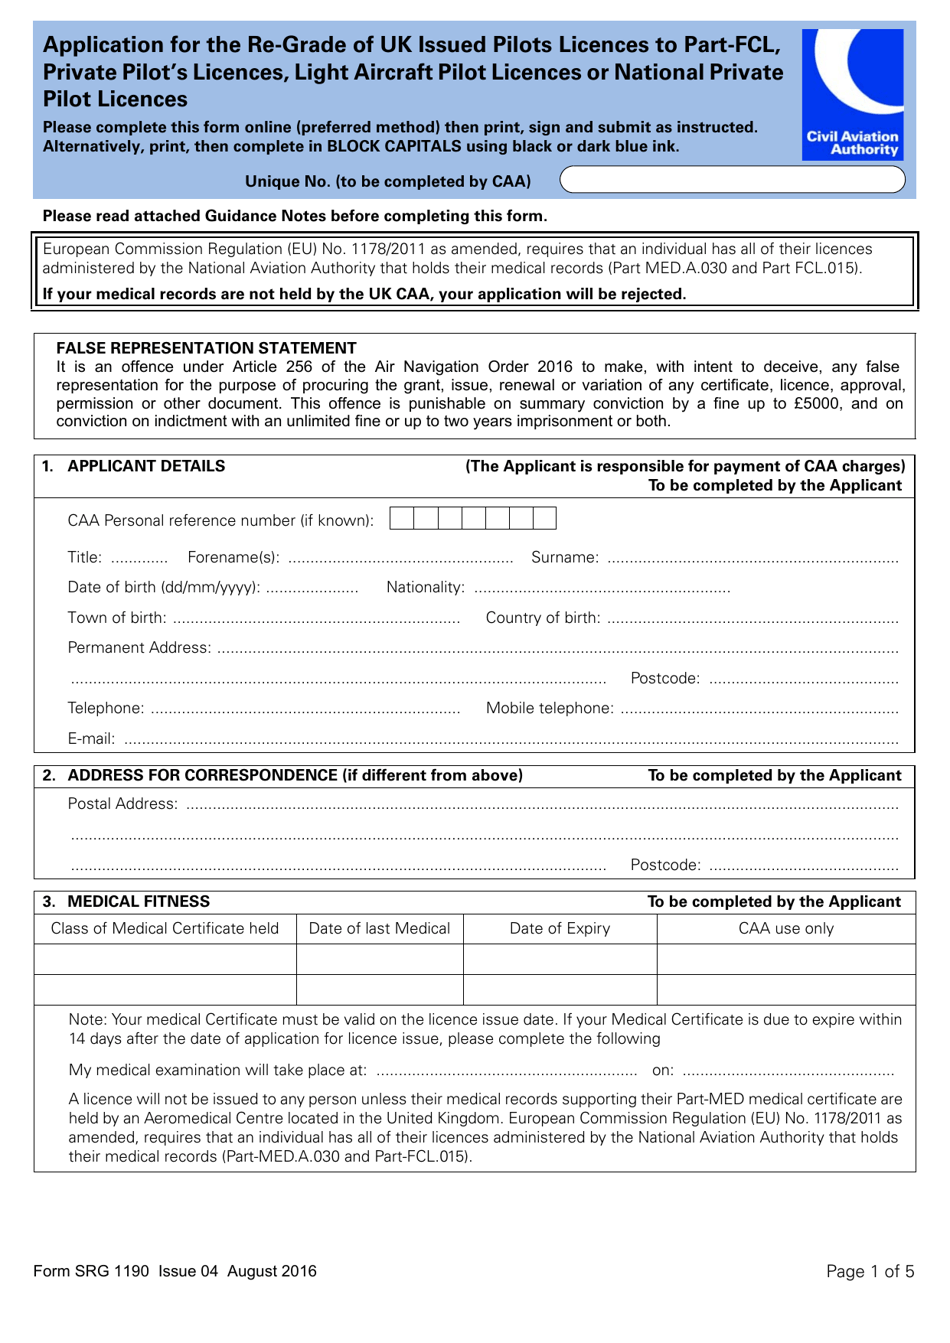 Form SRG1190 Application for the Re-grade of UK Issued Pilots Licences to Part-Fcl, Private Pilots Licences, Light Aircraft Pilot Licences or National Private Pilot Licences - United Kingdom, Page 1